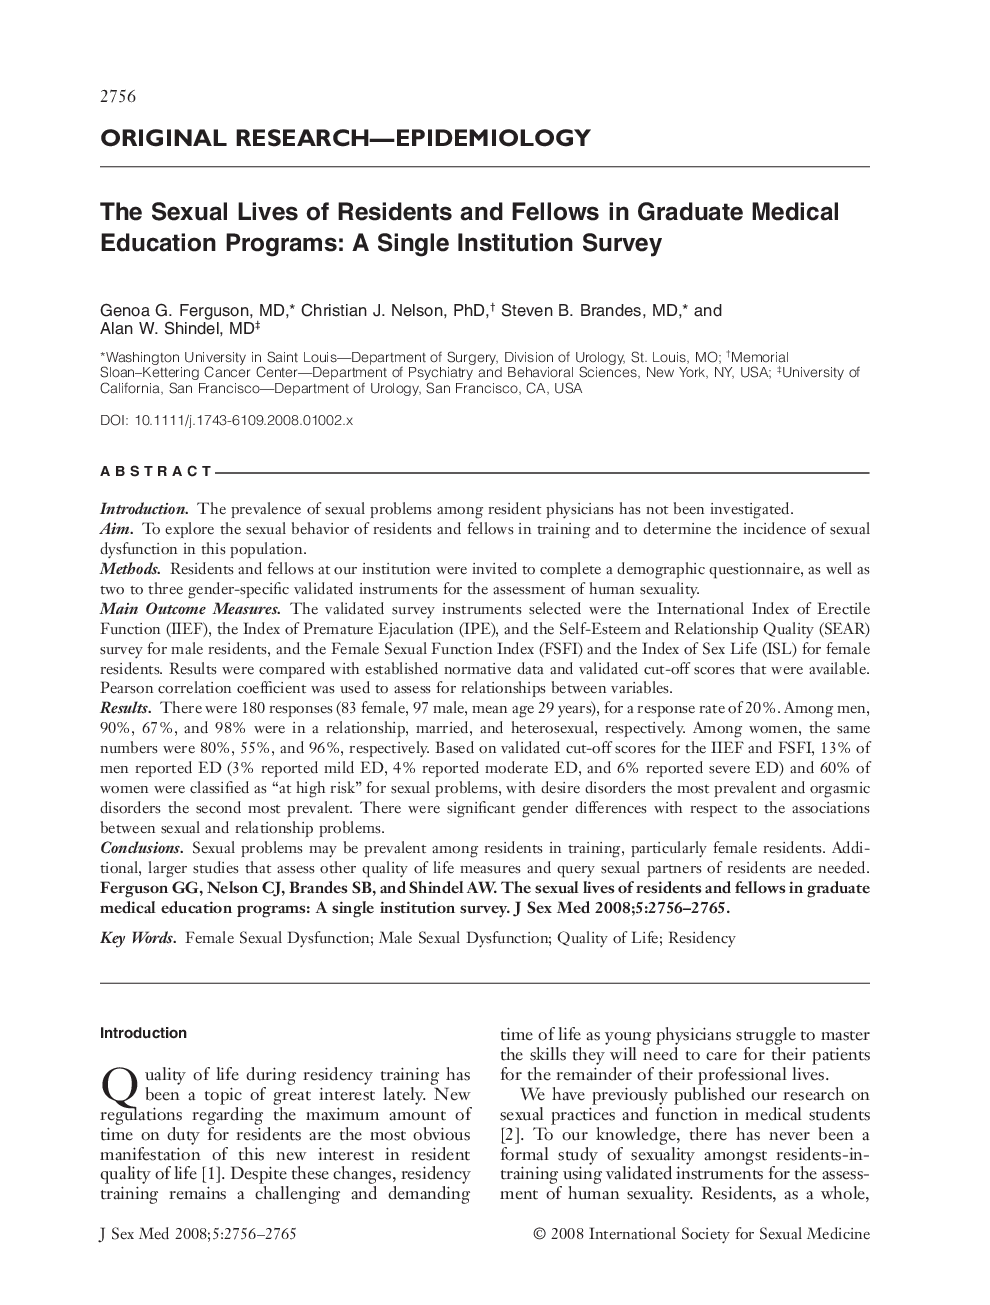 The Sexual Lives of Residents and Fellows in Graduate Medical Education Programs: A Single Institution Survey